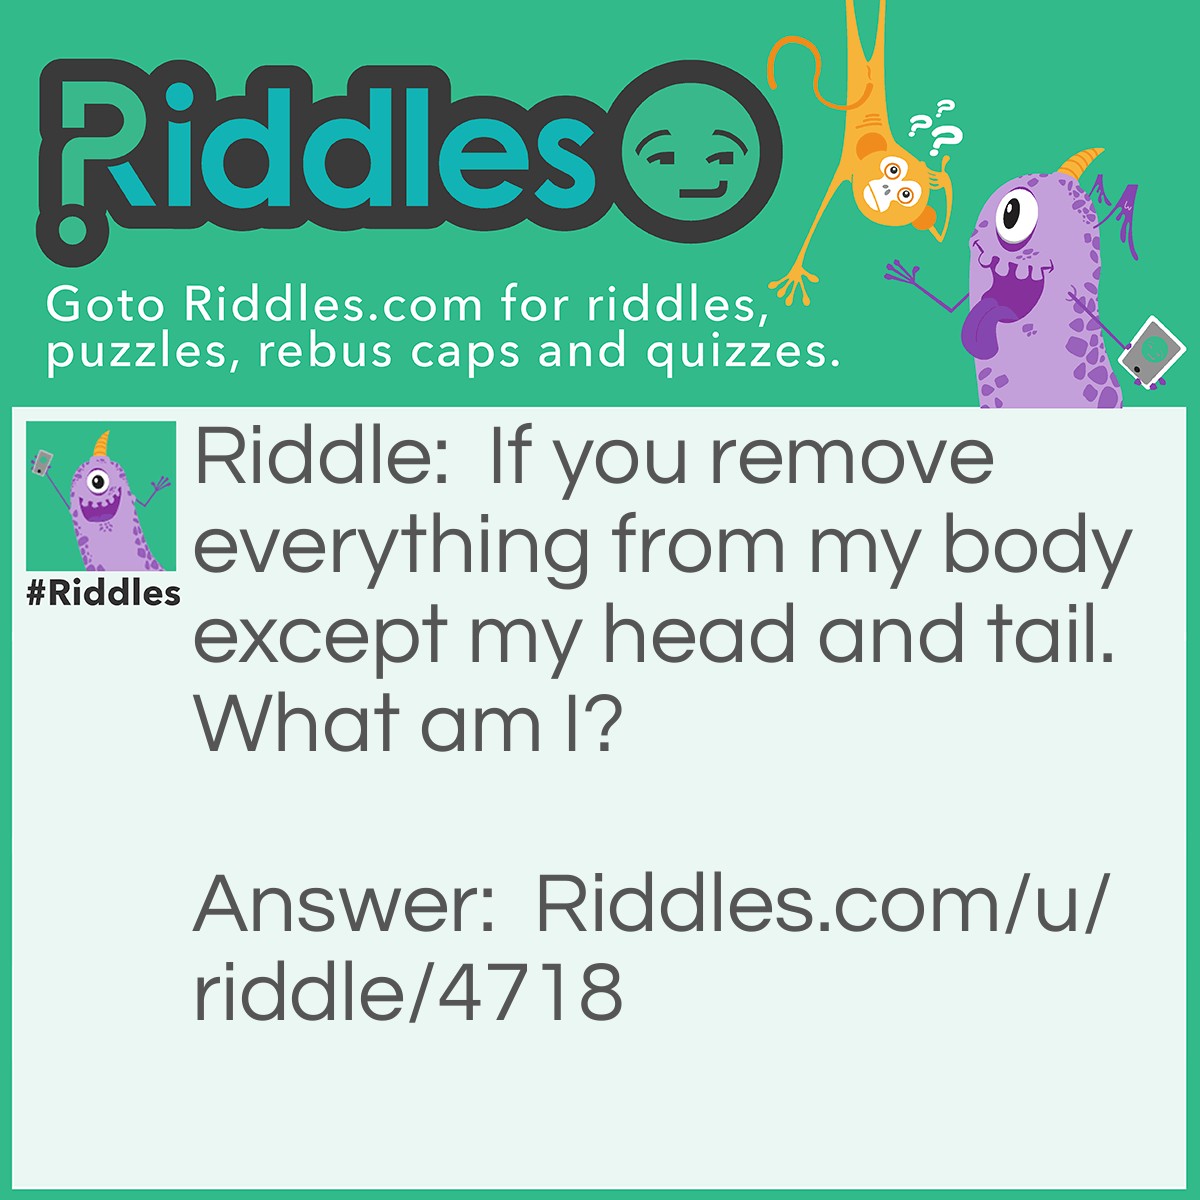 Riddle: If you remove everything from my body except my head and tail. What am I? Answer: A coin!